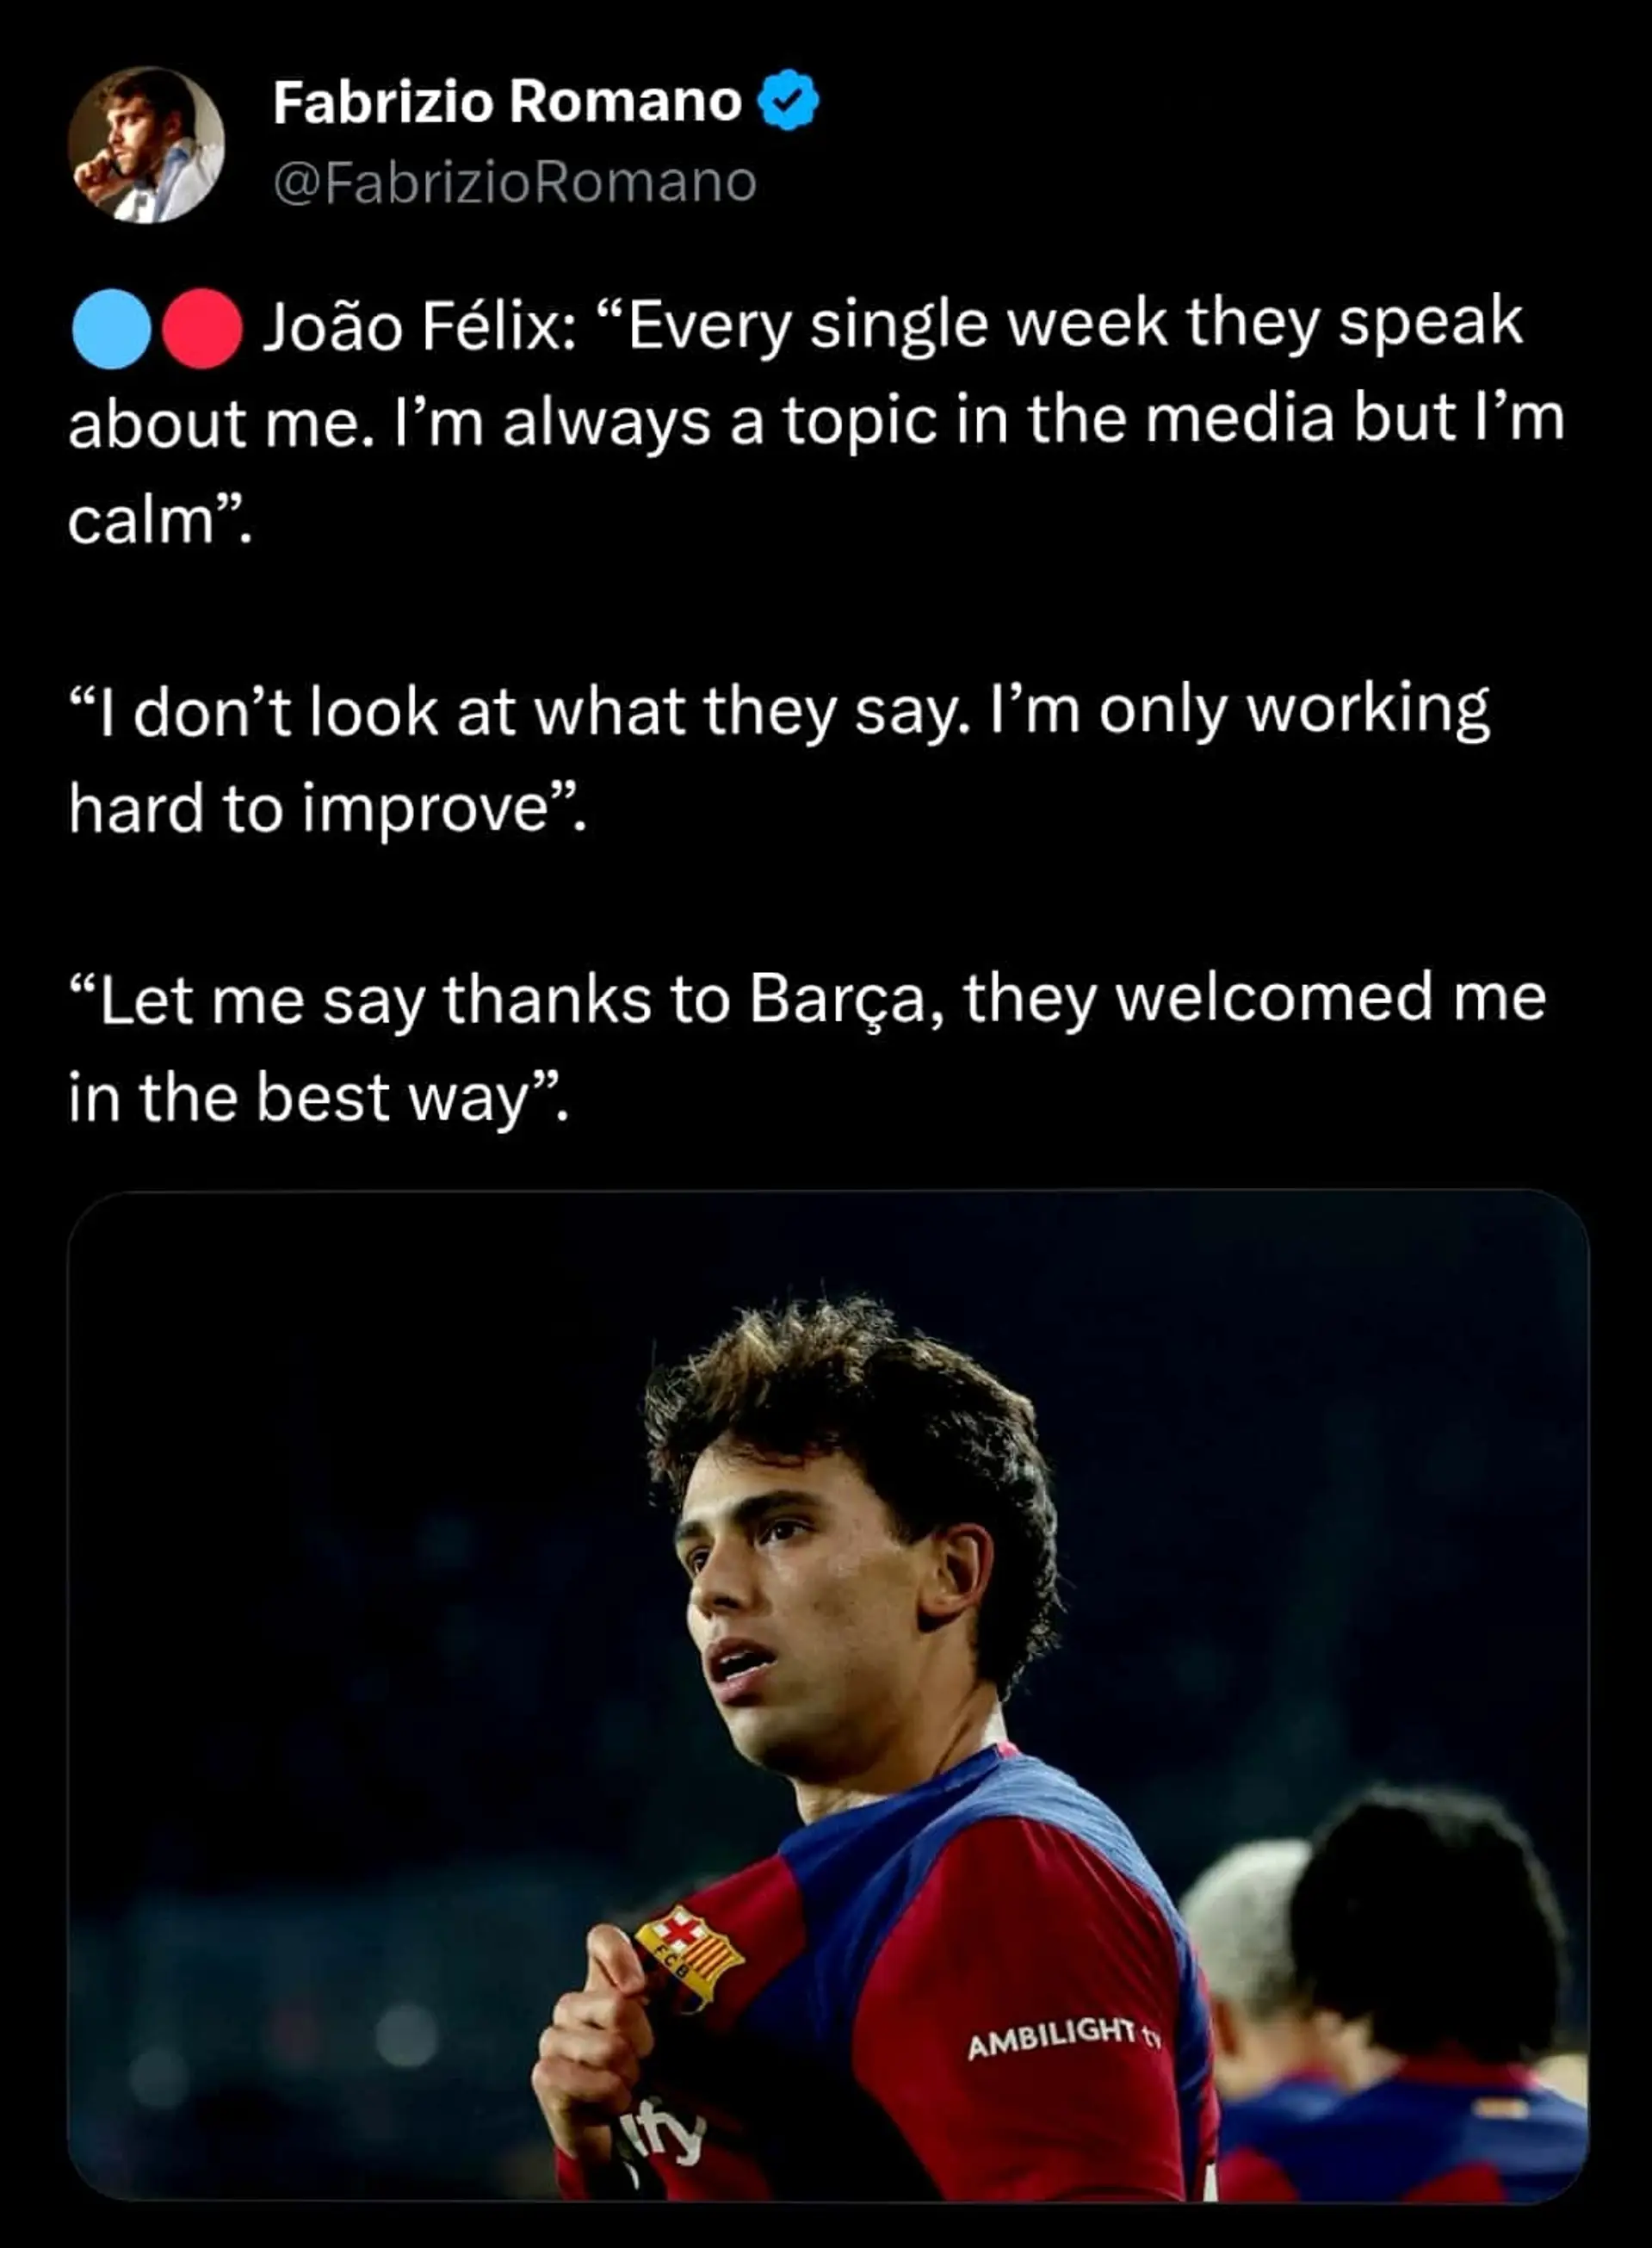 🔵🔴 João Félix: “Let me say thanks to Barça, they welcomed me in the best way”. 💯YOU'RE WELCOME 💪